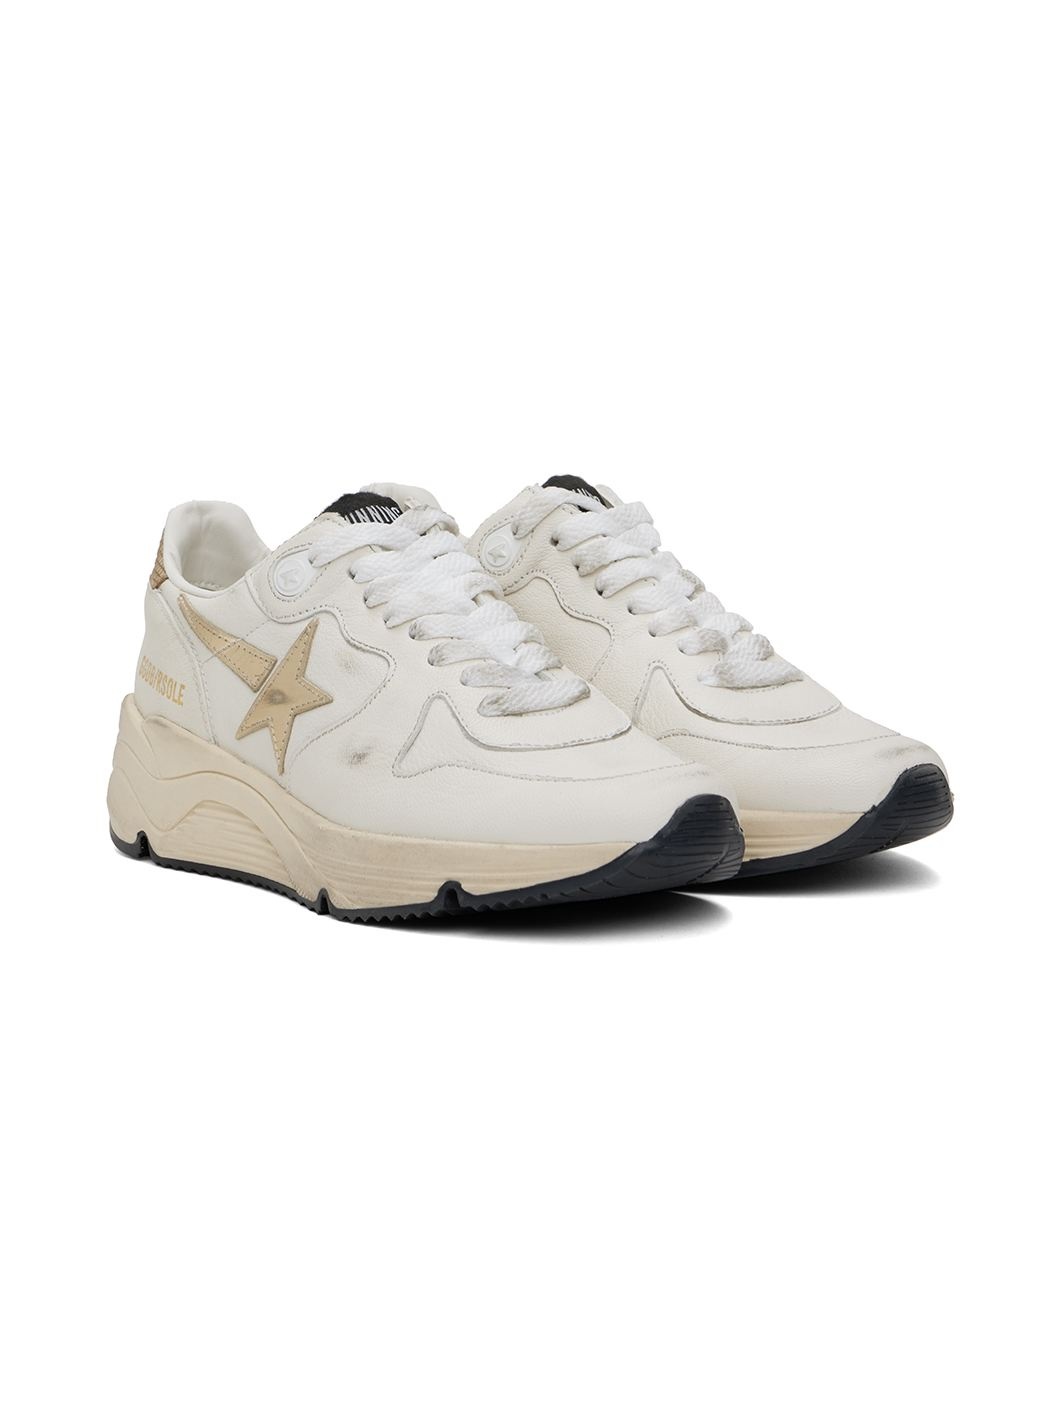 Off-White & Beige Running Sole Sneakers - 4